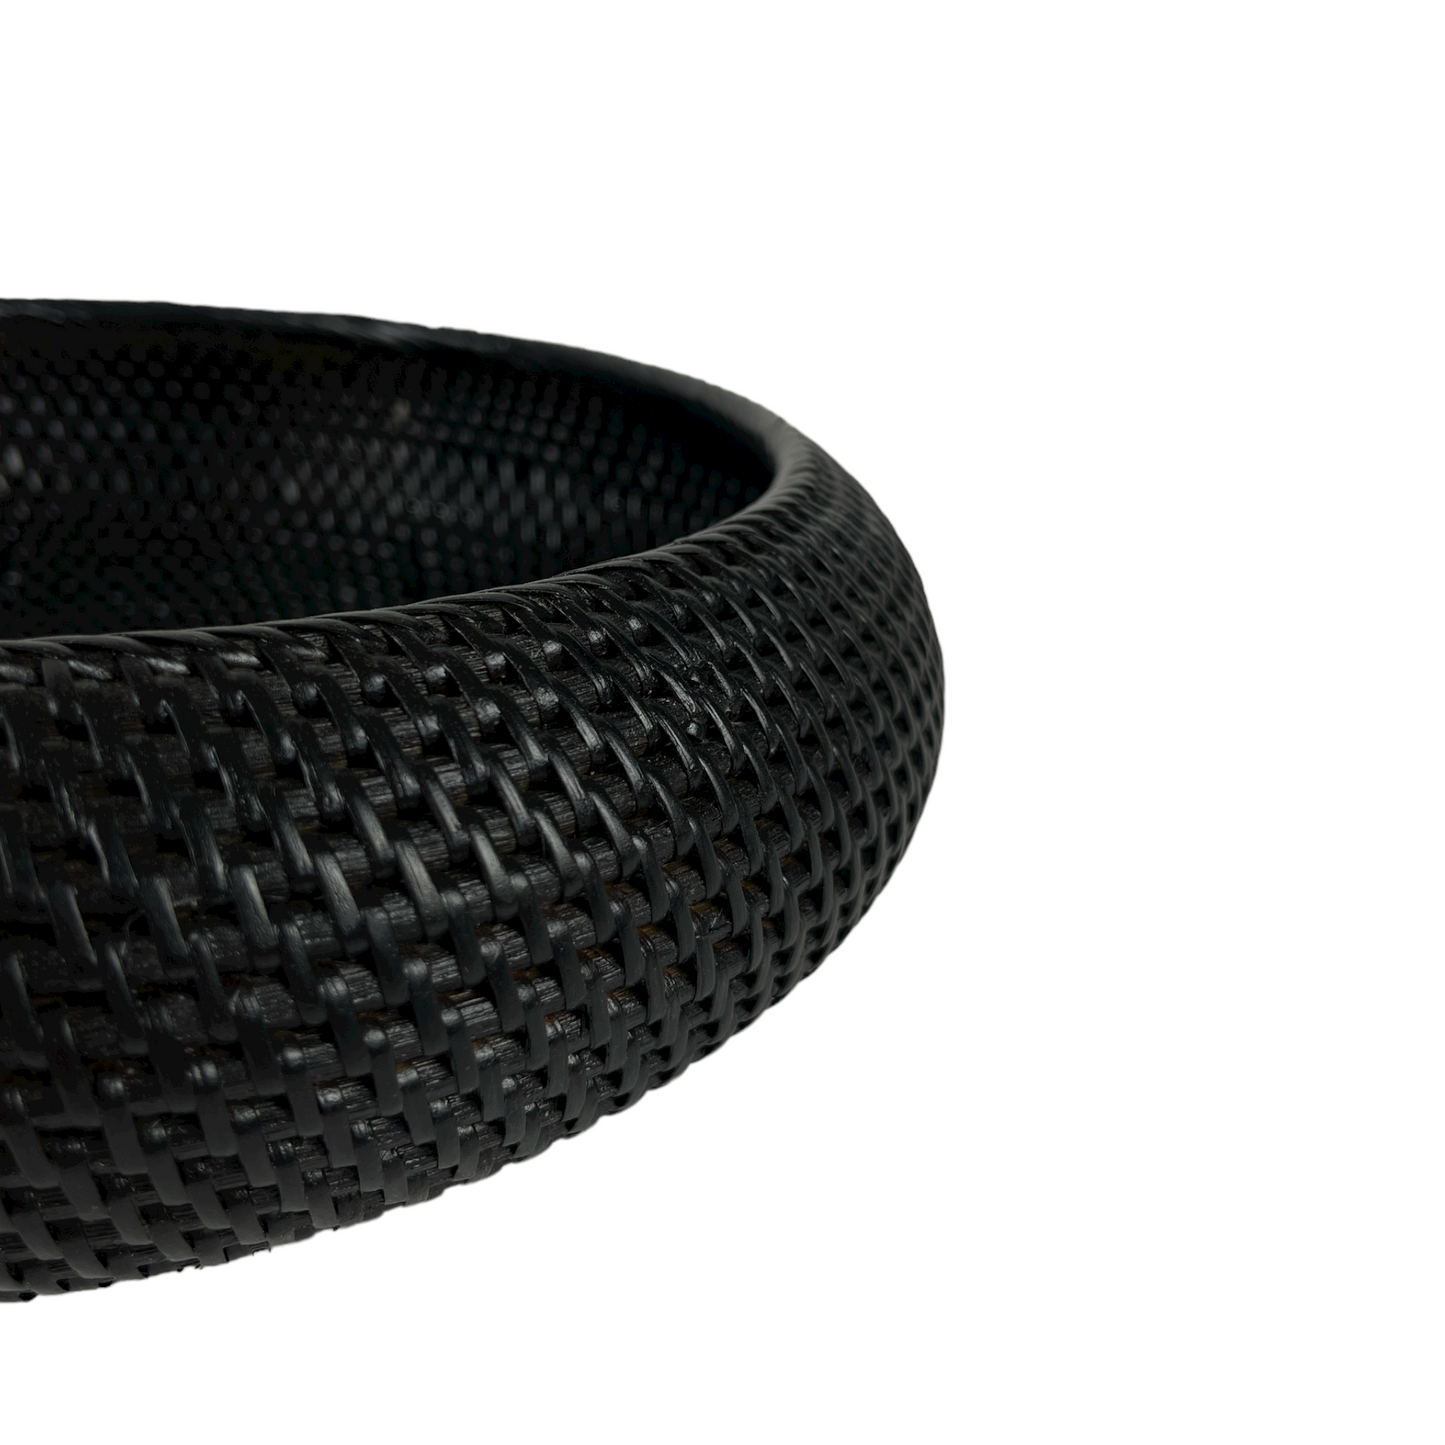 Get ready to elevate your home decor with our Bergaya Black Rattan Bowl. Carefully crafted with an artful touch, this stylish piece will add a beautiful texture to any room, instantly capturing attention and admiration. Detail.